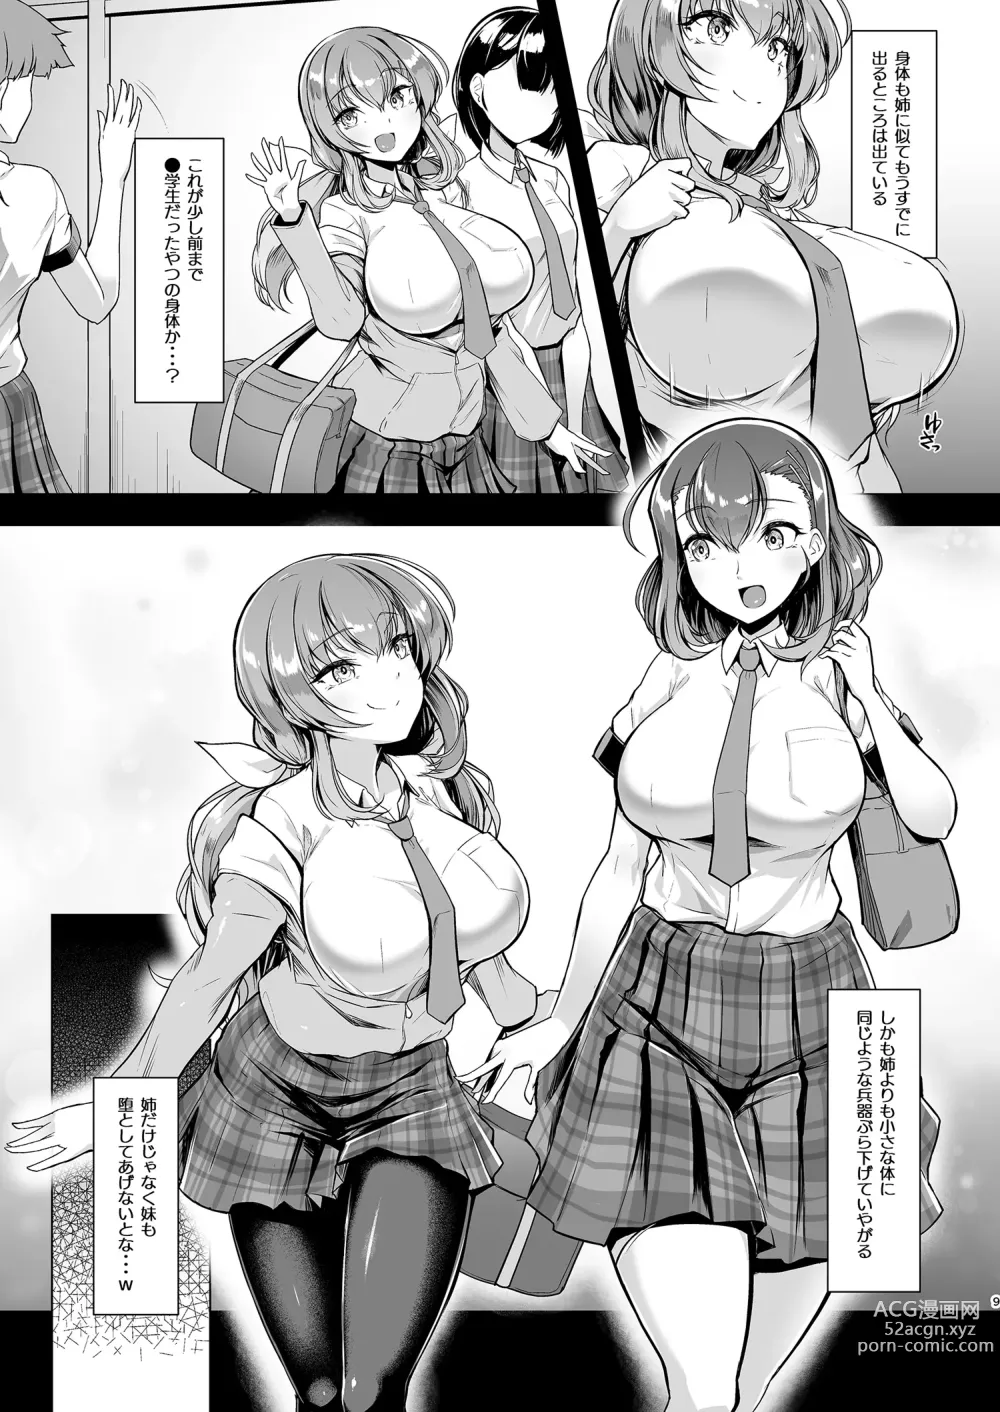 Page 6 of doujinshi Swimming Club Ace ●● Program 2